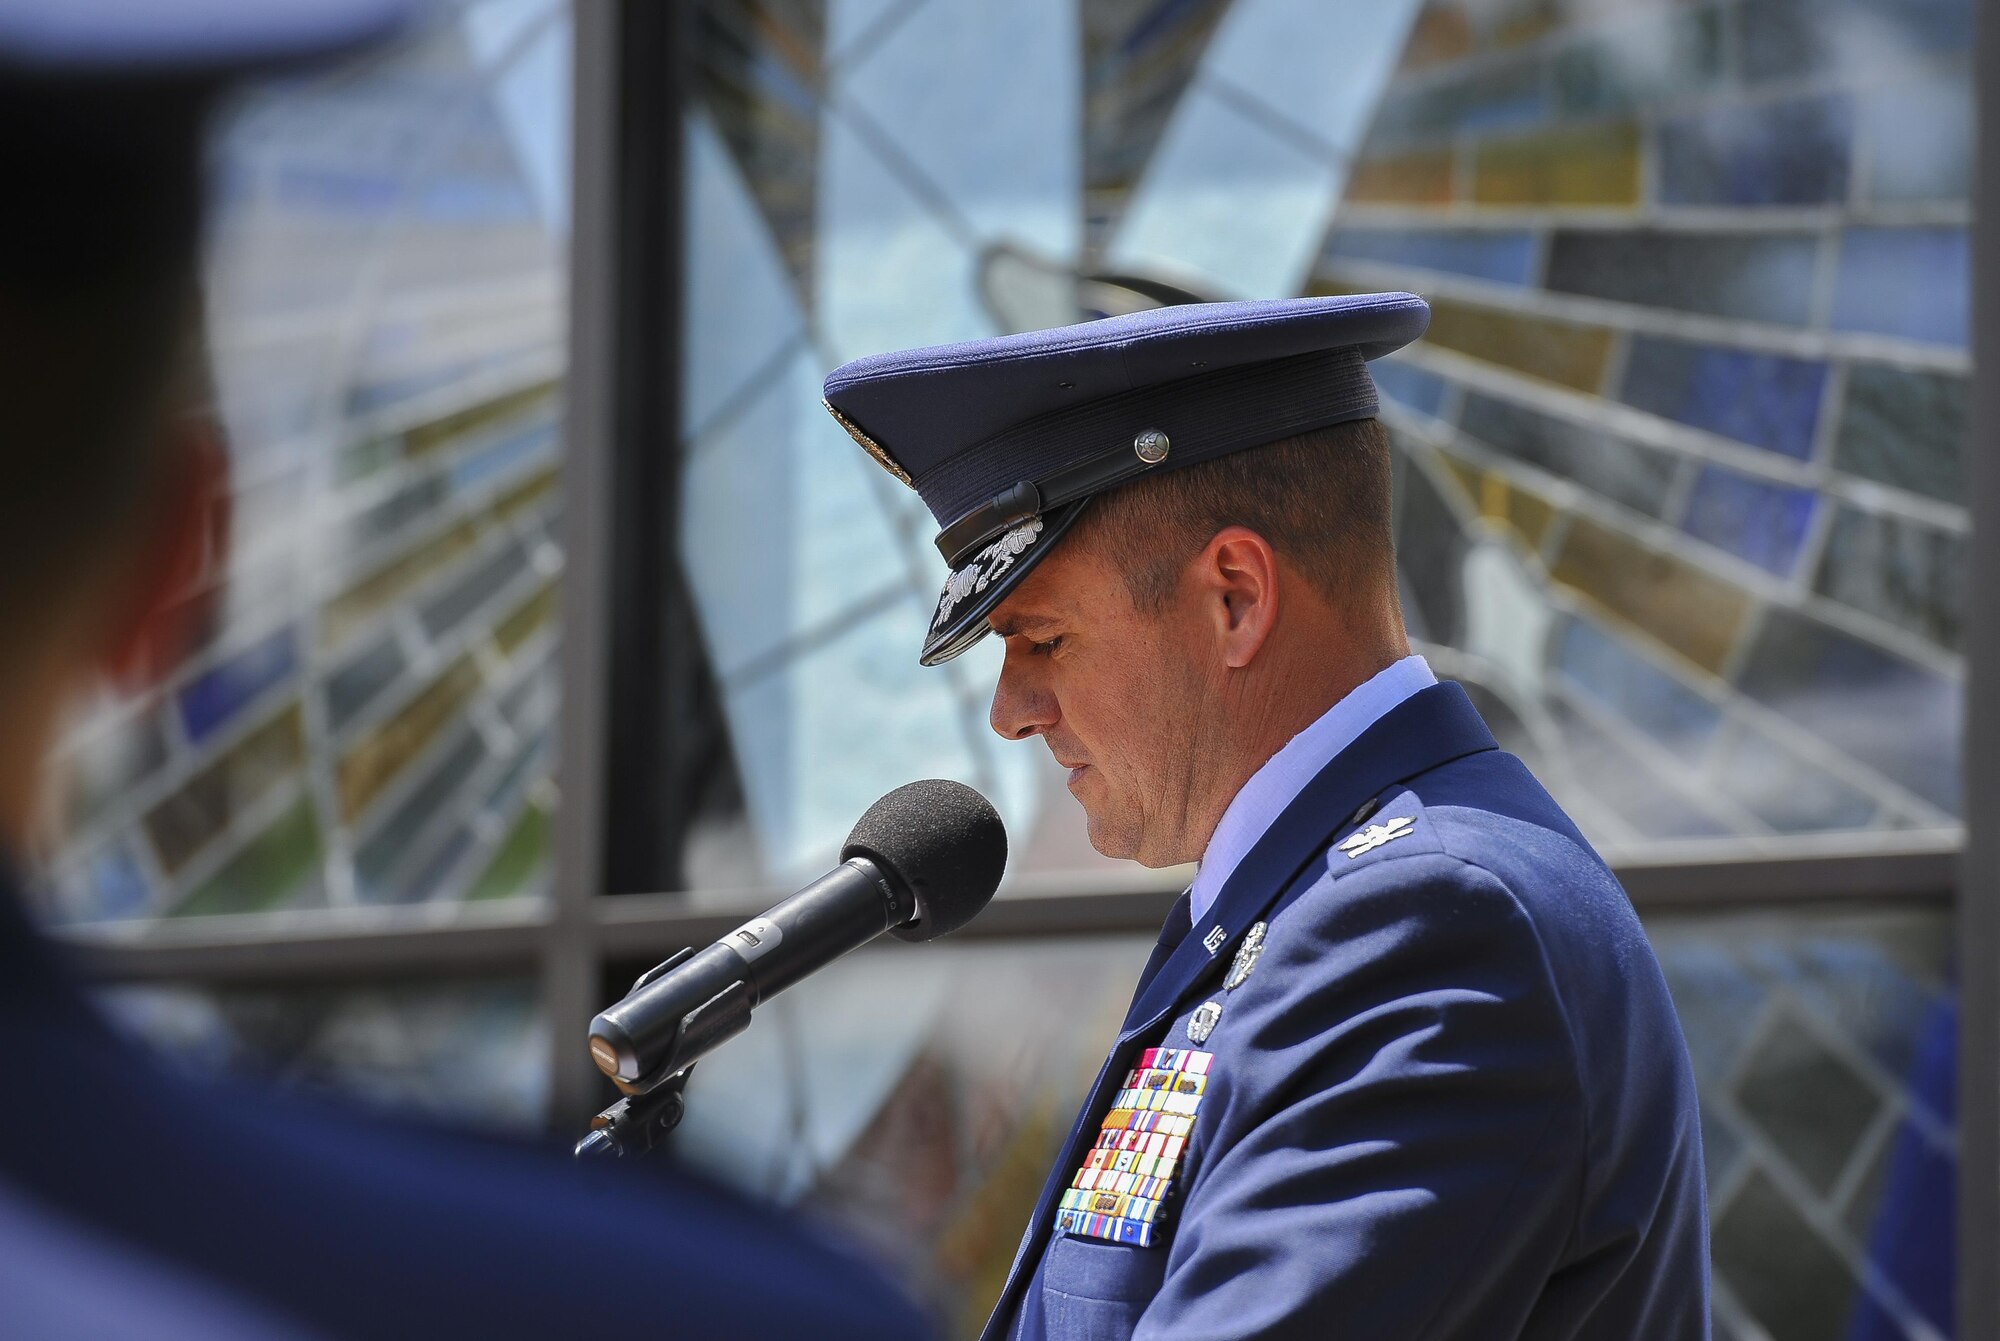 Col. Sean Farrell, the commander of the 1st Special Operations Wing, provides remarks during a ceremony for the 36th anniversary of Operation Eagle Claw at Hurlburt Field, Fla., April 25, 2016. Operation Eagle Claw, conducted April 24, 1980, was a joint-services mission to rescue Americans who were being held hostage by a mob in Tehran, Iran, since Nov. 4, 1979. Tragically, the attempt ended in the death of eight service members, including five Air Commandos from the 1st Special Operations Wing, 8th Special Operations Squadron. (U.S. Air Force photo Airman 1st Class Kai White)